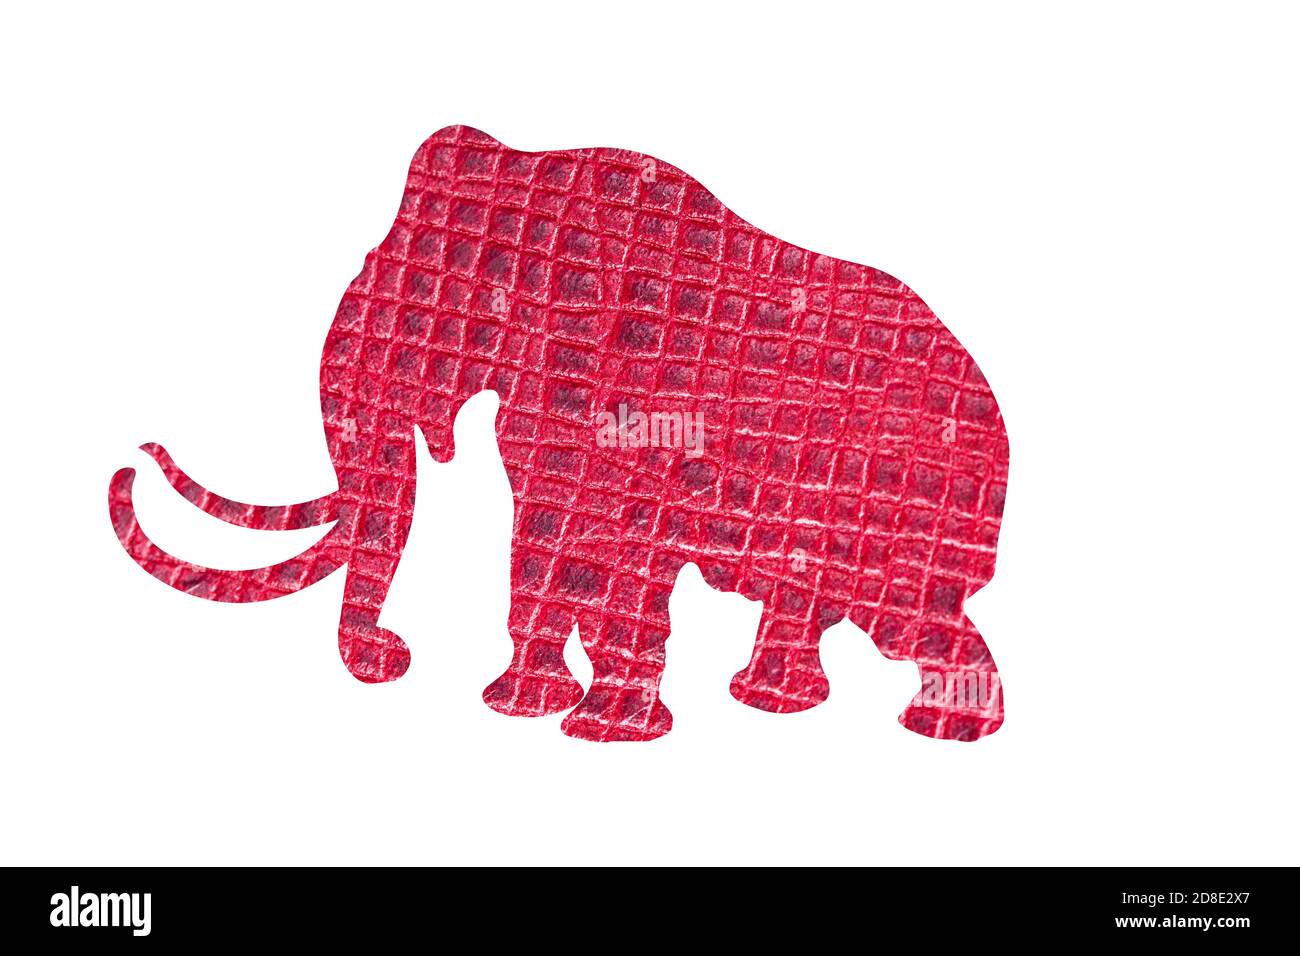 elephant silhouette with skin texture isolated on white background Stock Photo